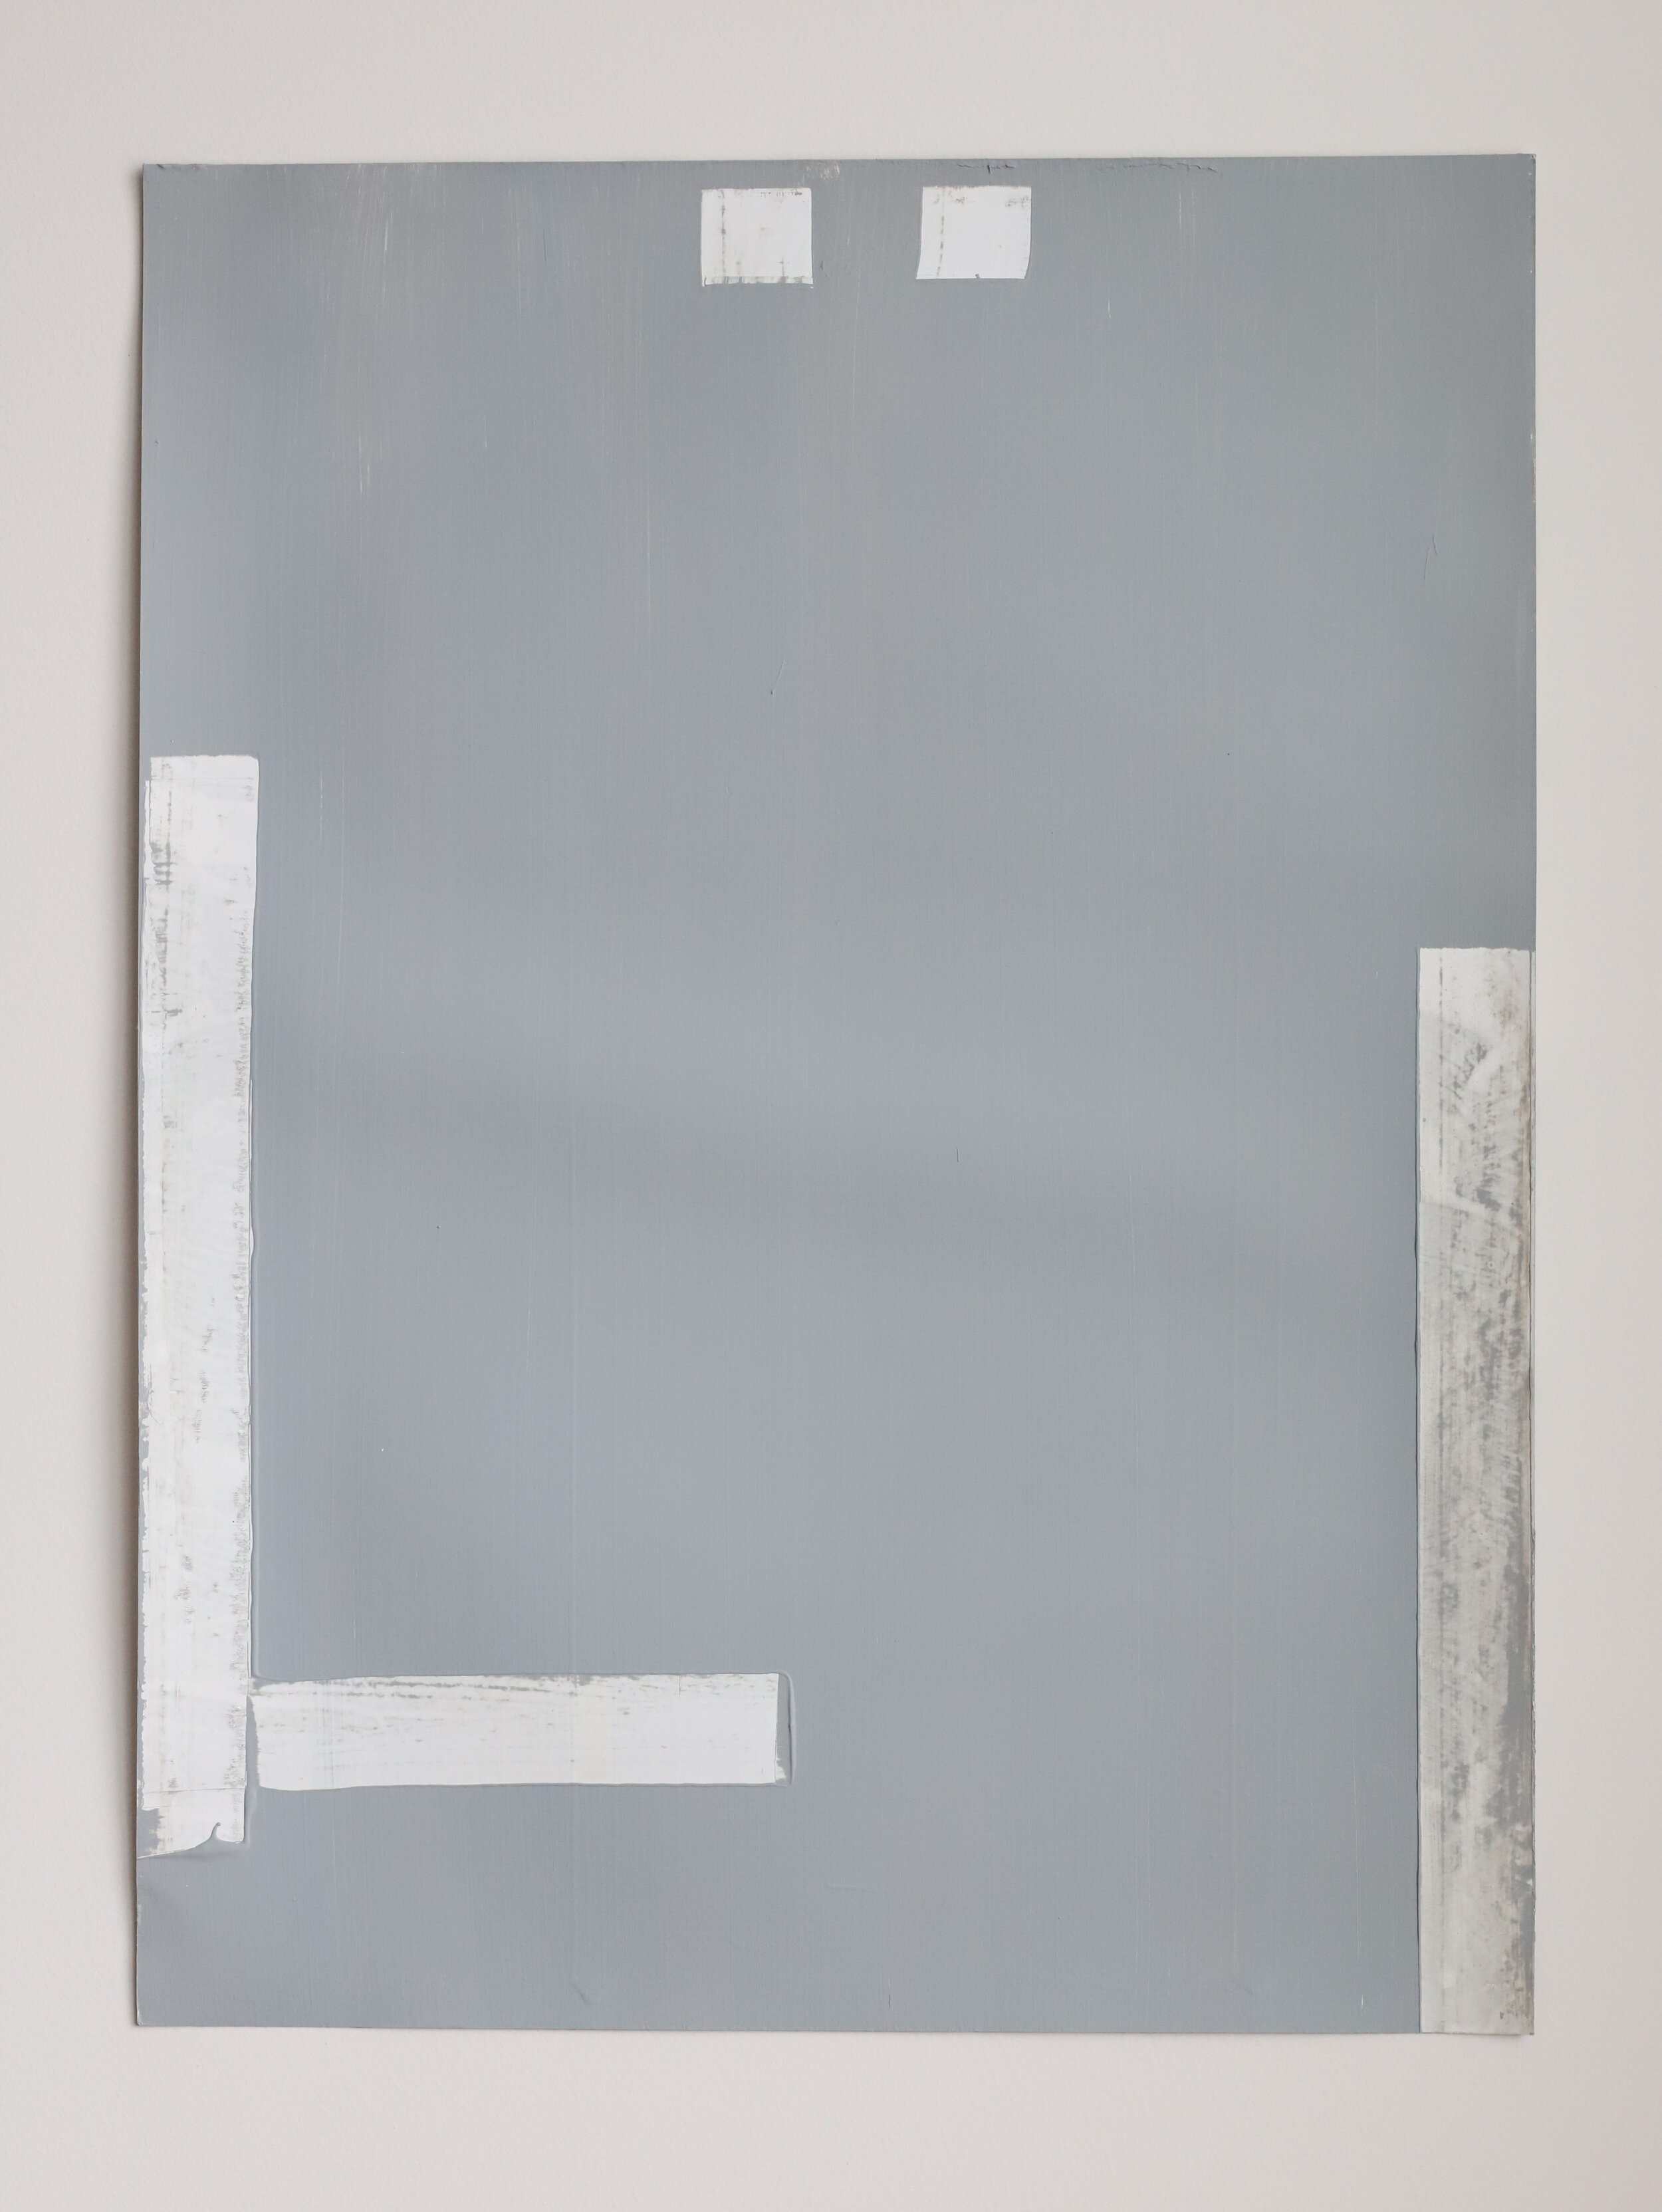  Untitled, gesso and acrylic on paper, 61x46cm, 2019 